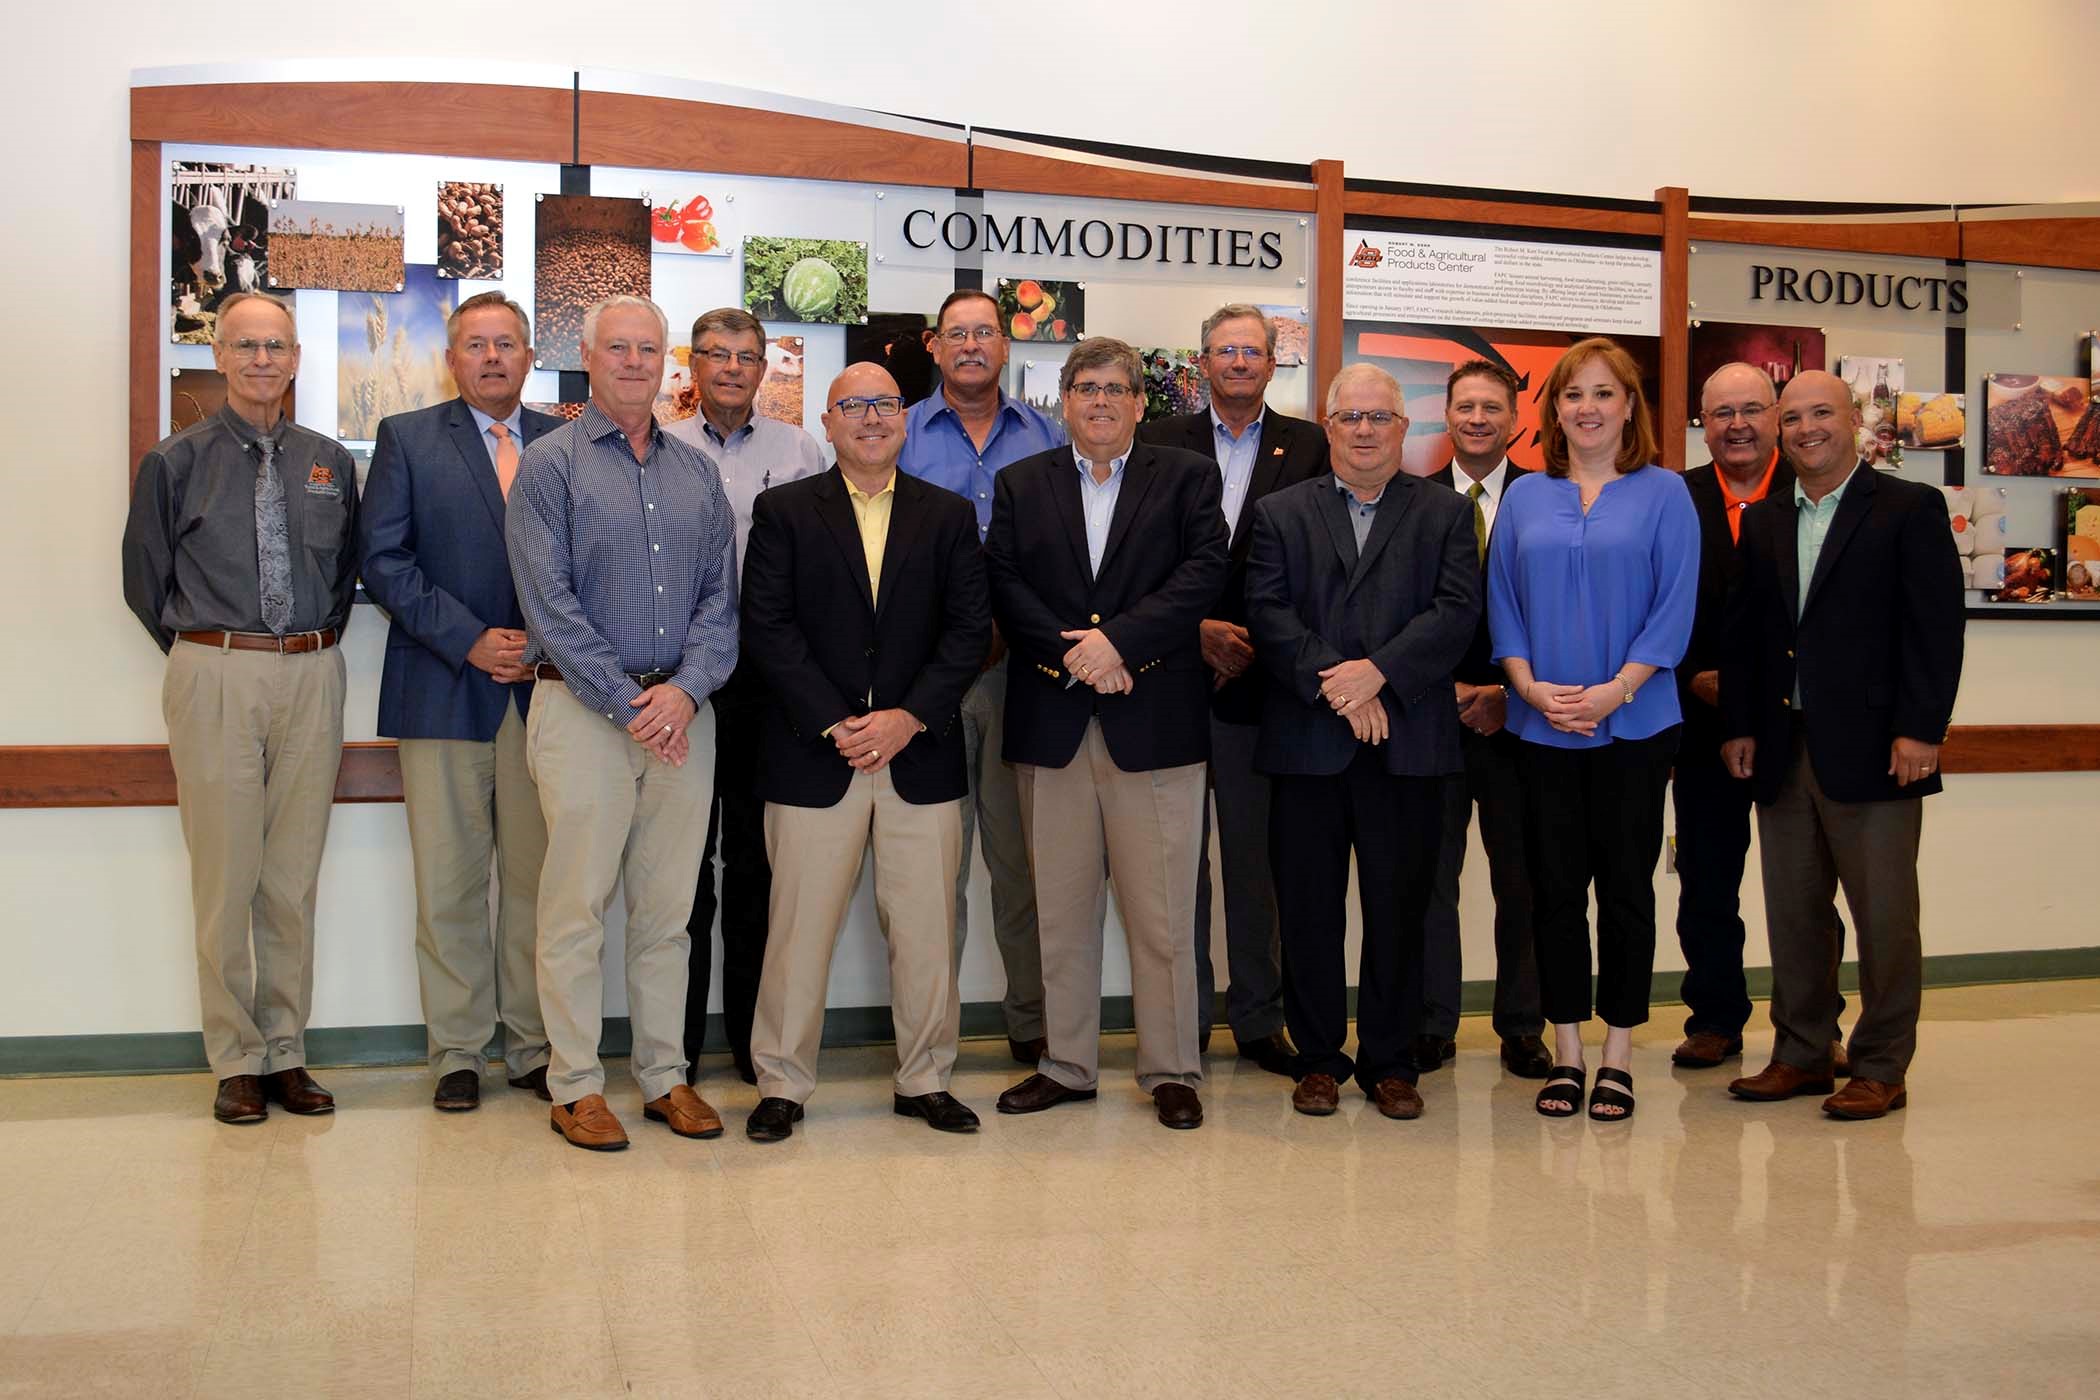 FAPC's Industry Advisory Committee Reinforces Its Attention to Food Research, Elects New Officers